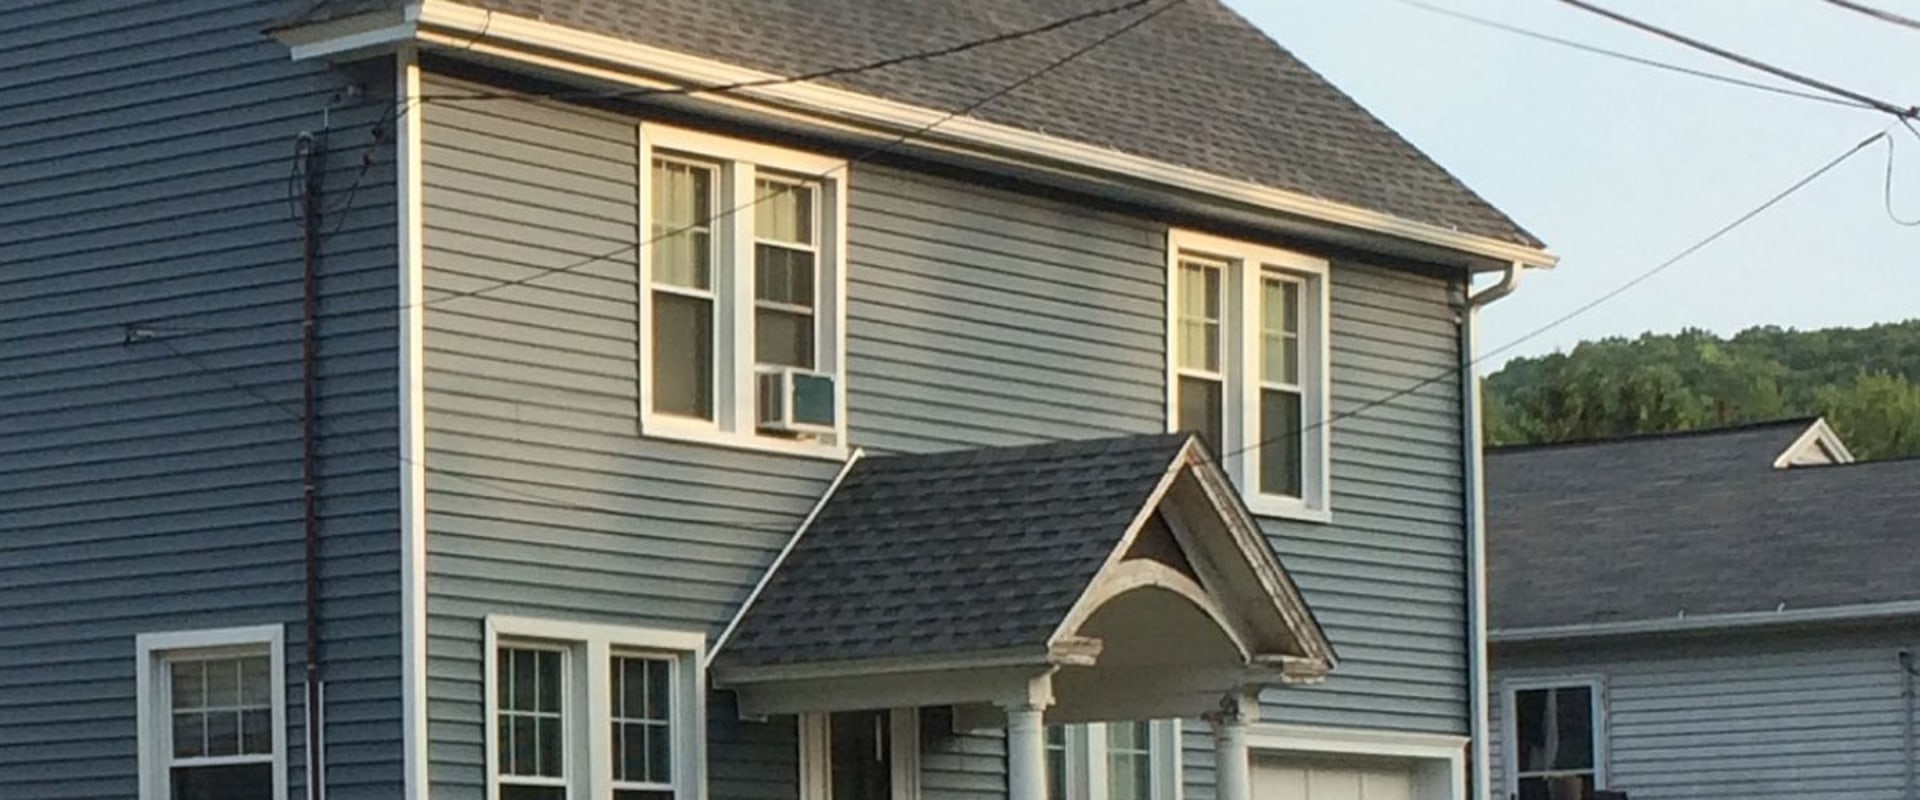 Is there vinyl siding that does not fade?